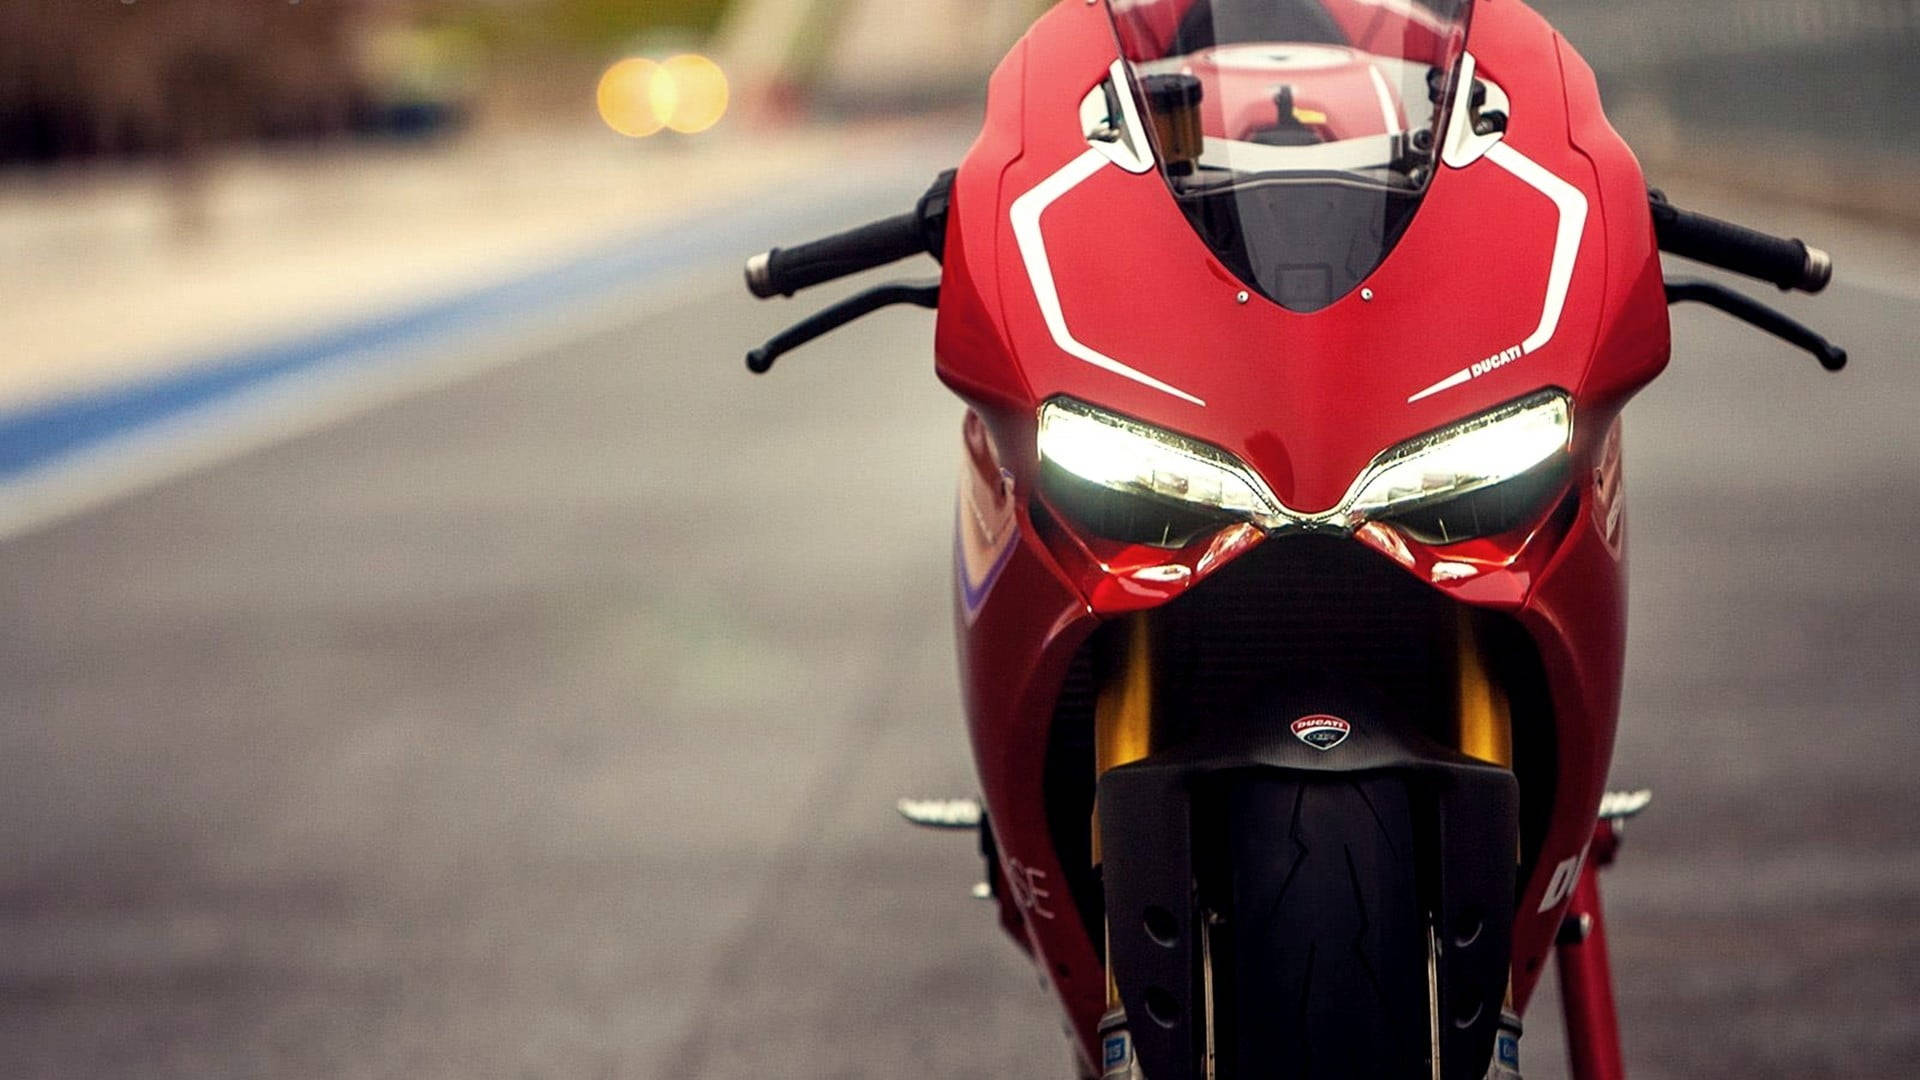 Blaze Through The Air With The Ducati 1199 Panigale R Superbike